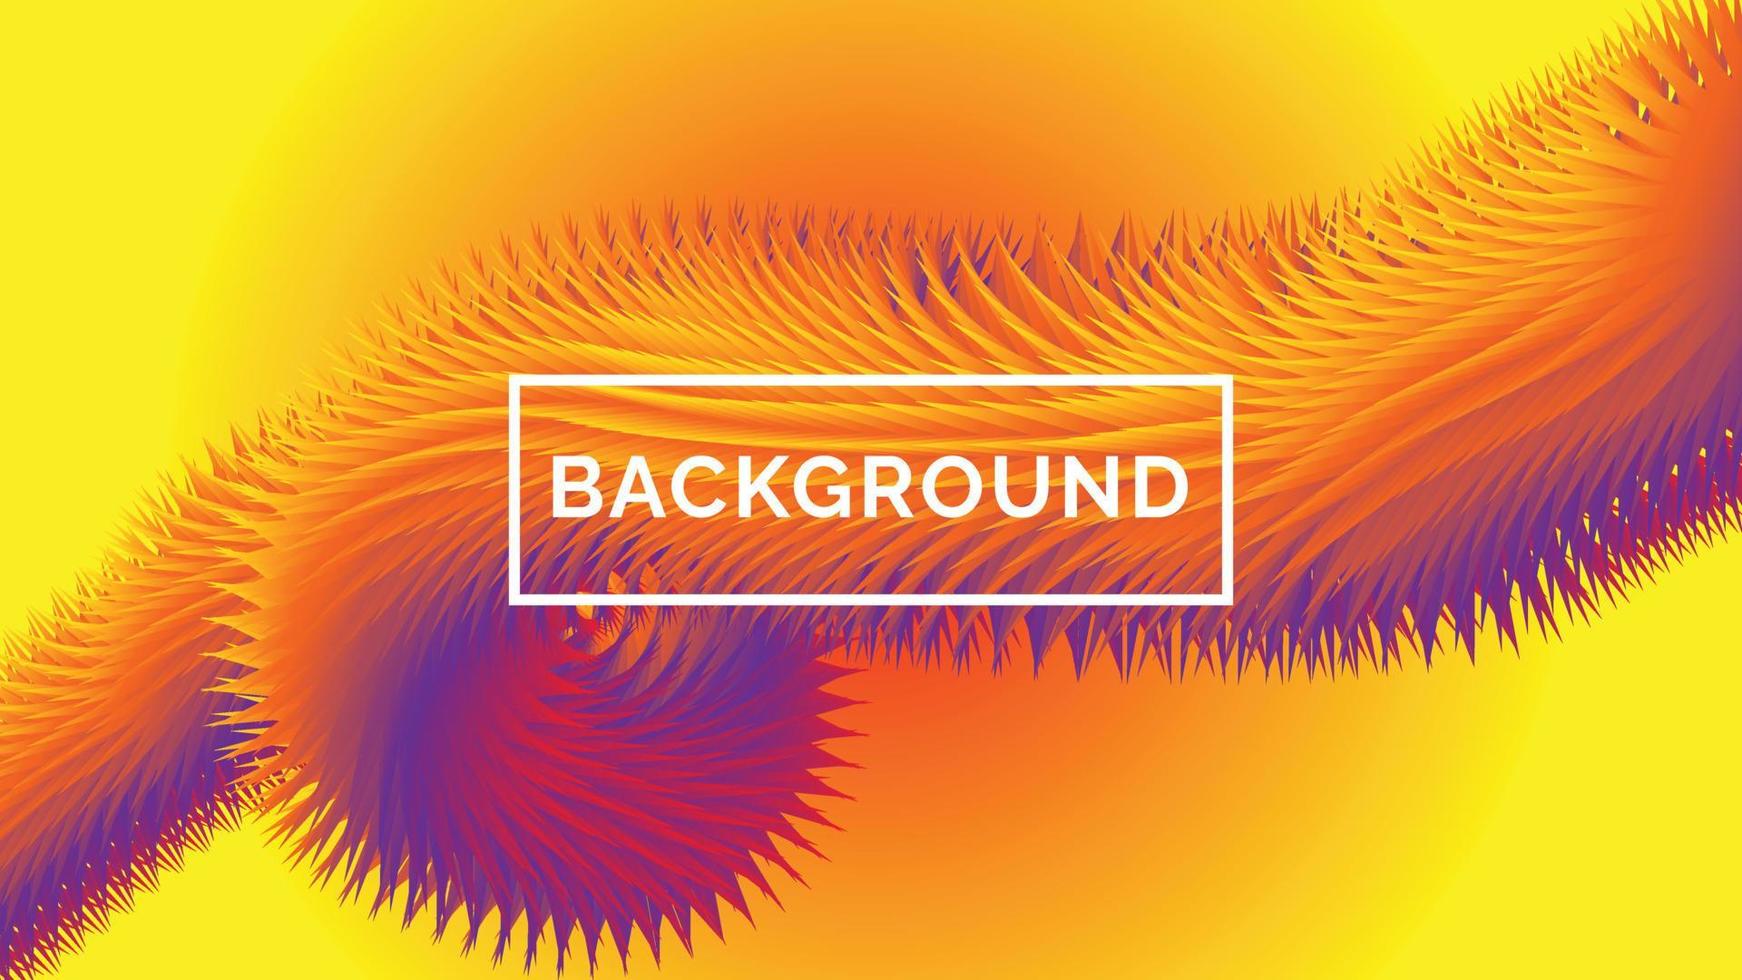 Modern and abstract background template design vector